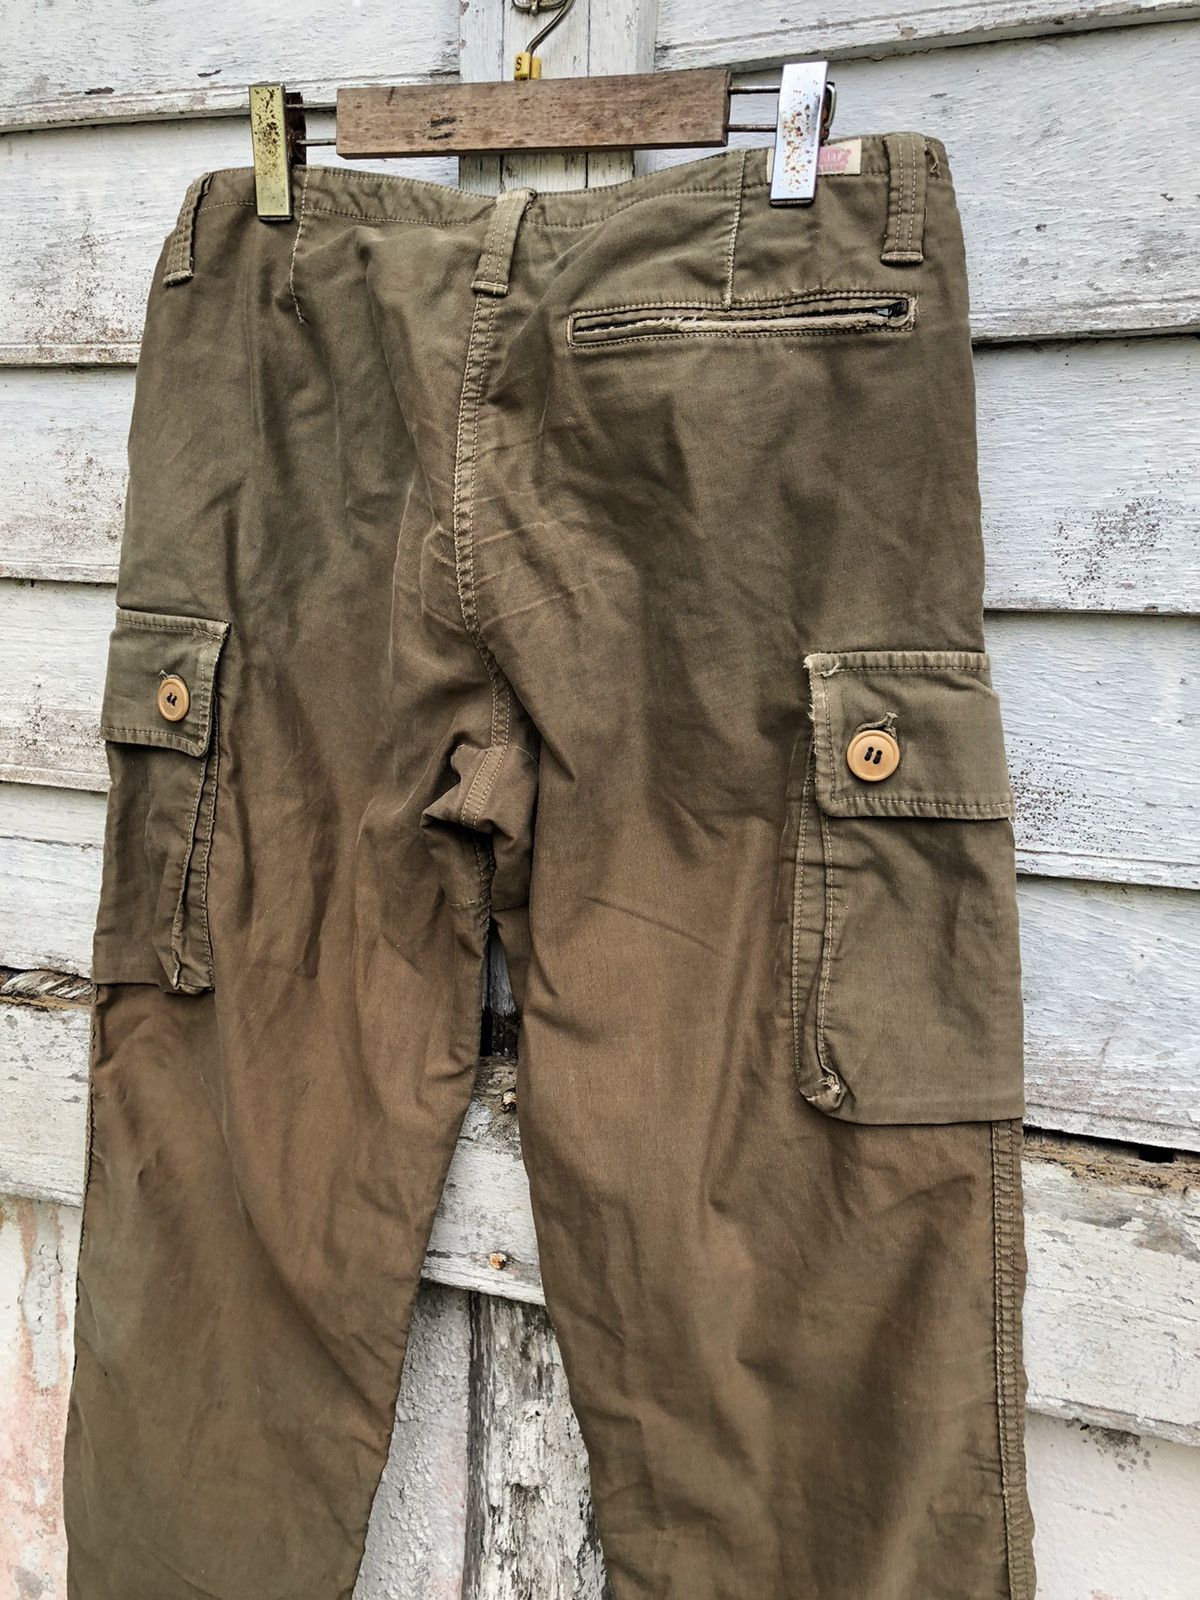 Distressed Sunfaded Hollywood Ranch Heavy Duty Cargo Pant - 5